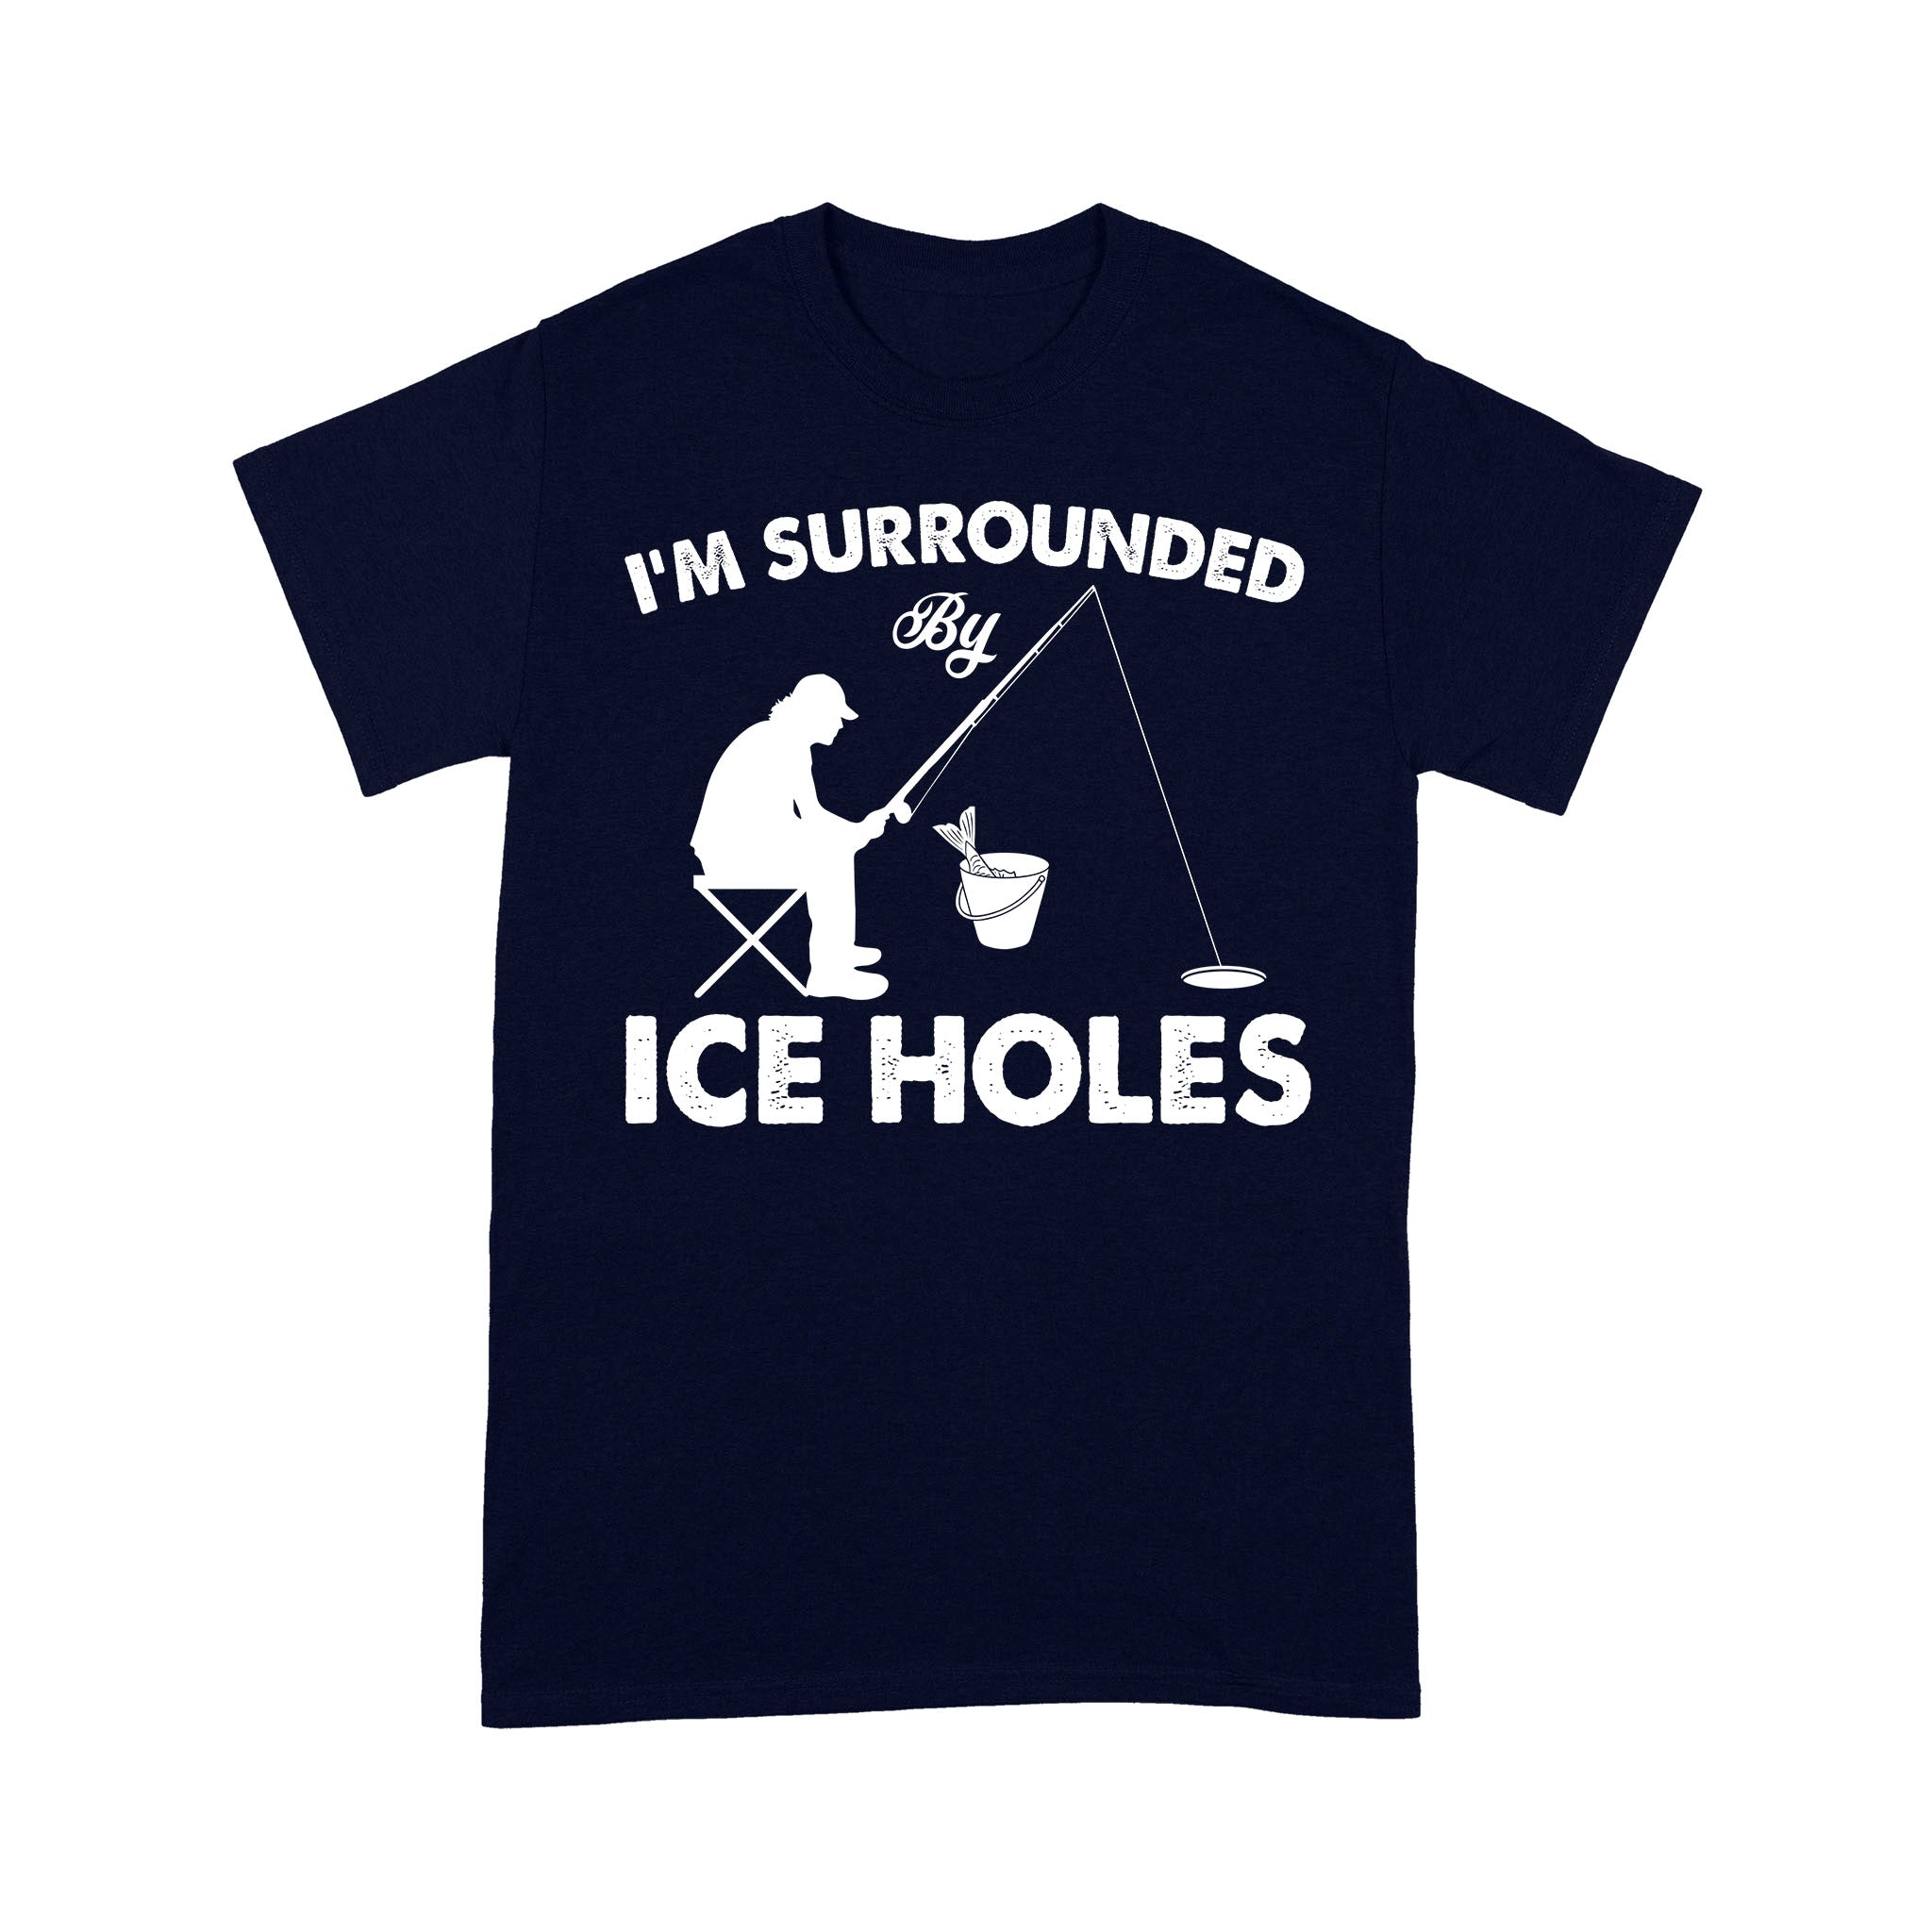 I'm surrounded by ice holes, funny ice fishing shirt D03 NPQ202 - Prem